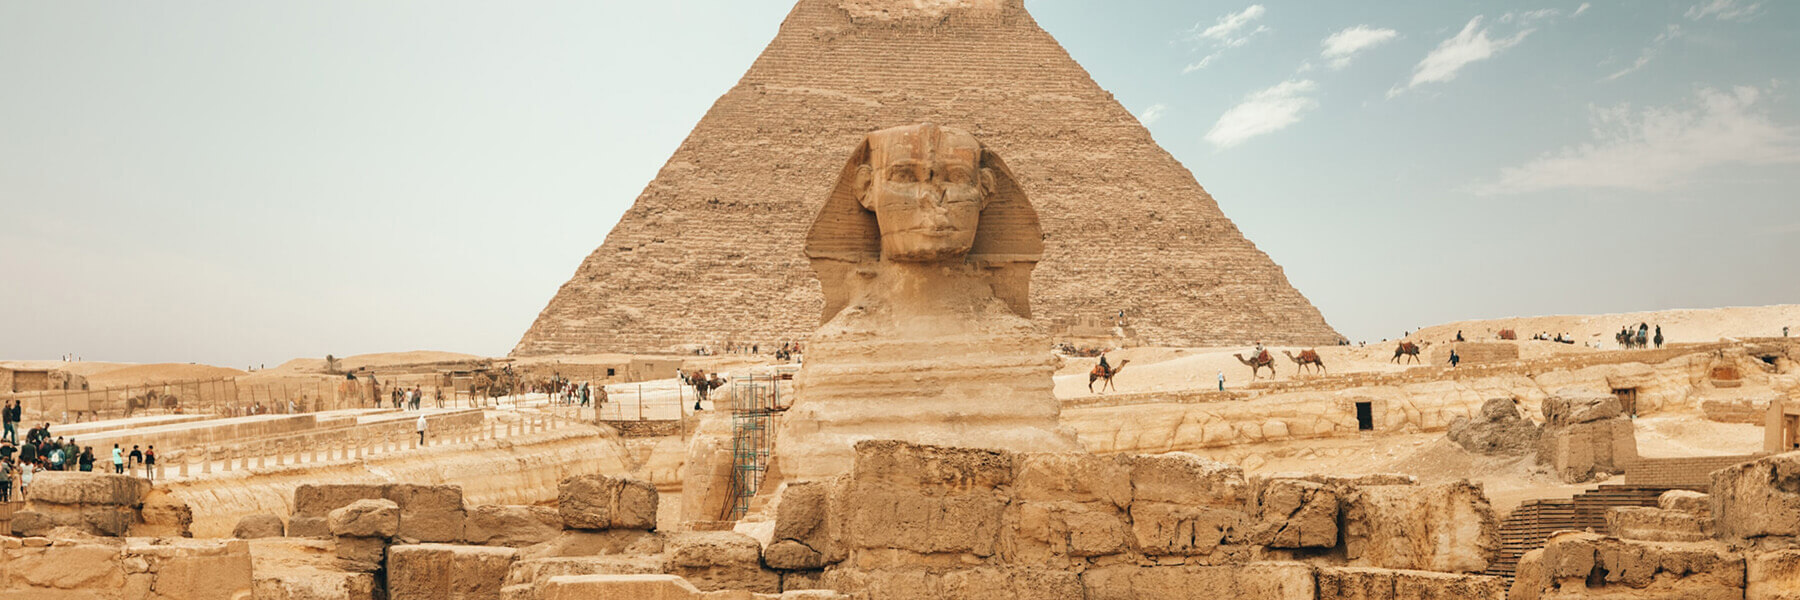 Great Sphinx and Pyramid of Giza